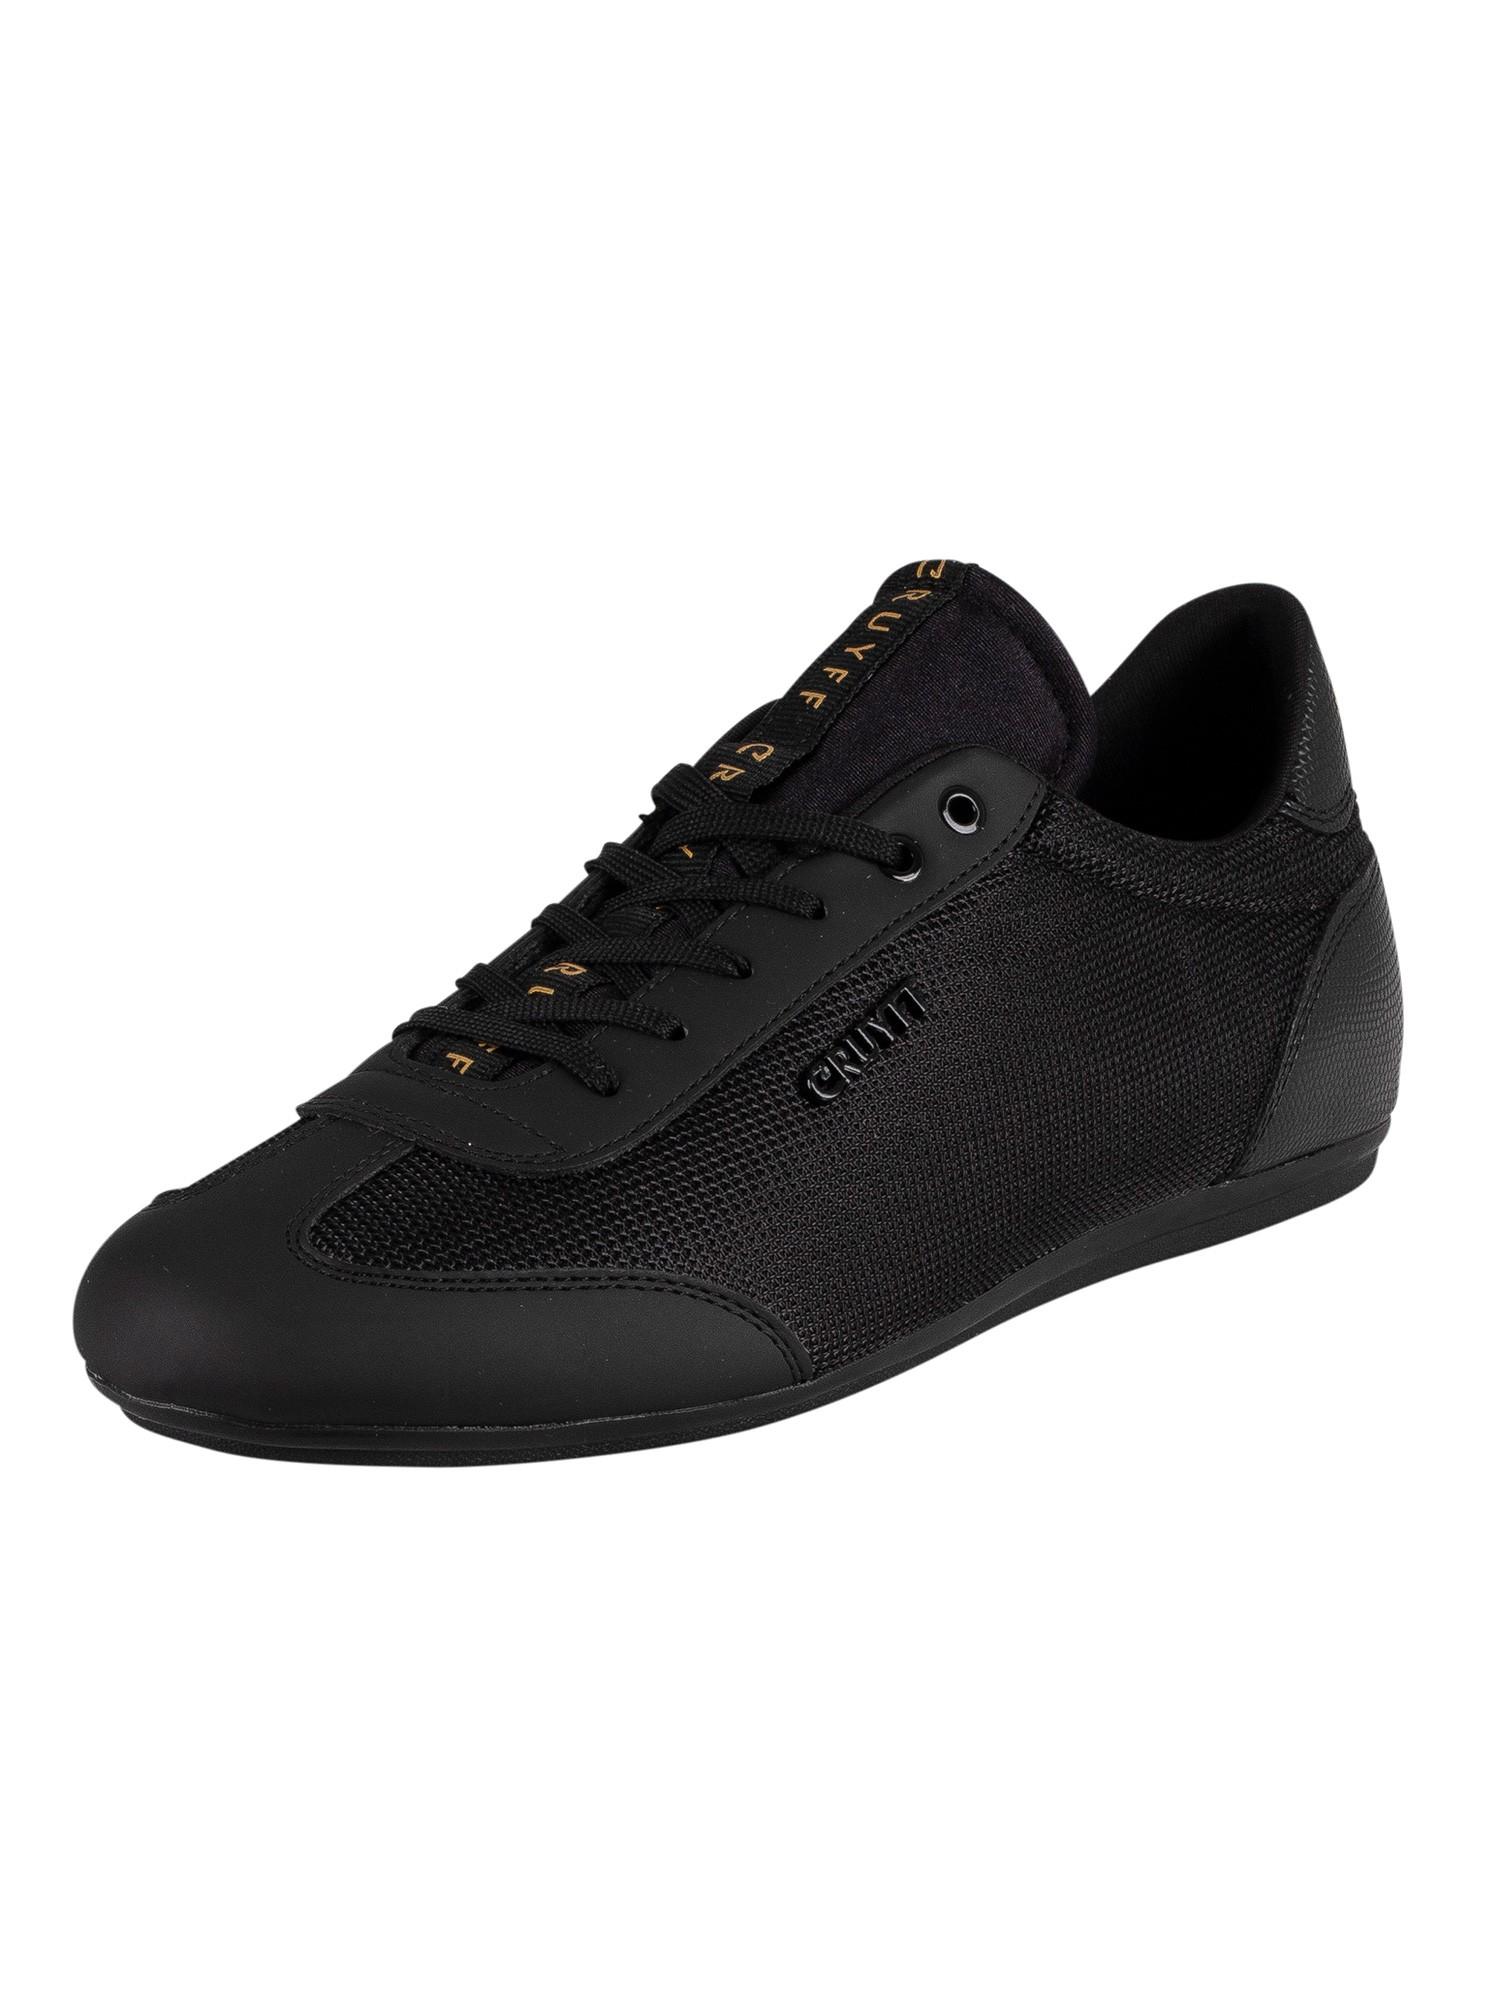 Cruyff Synthetic Recopa Trainers in Black/Gold (Black) for Men - Lyst